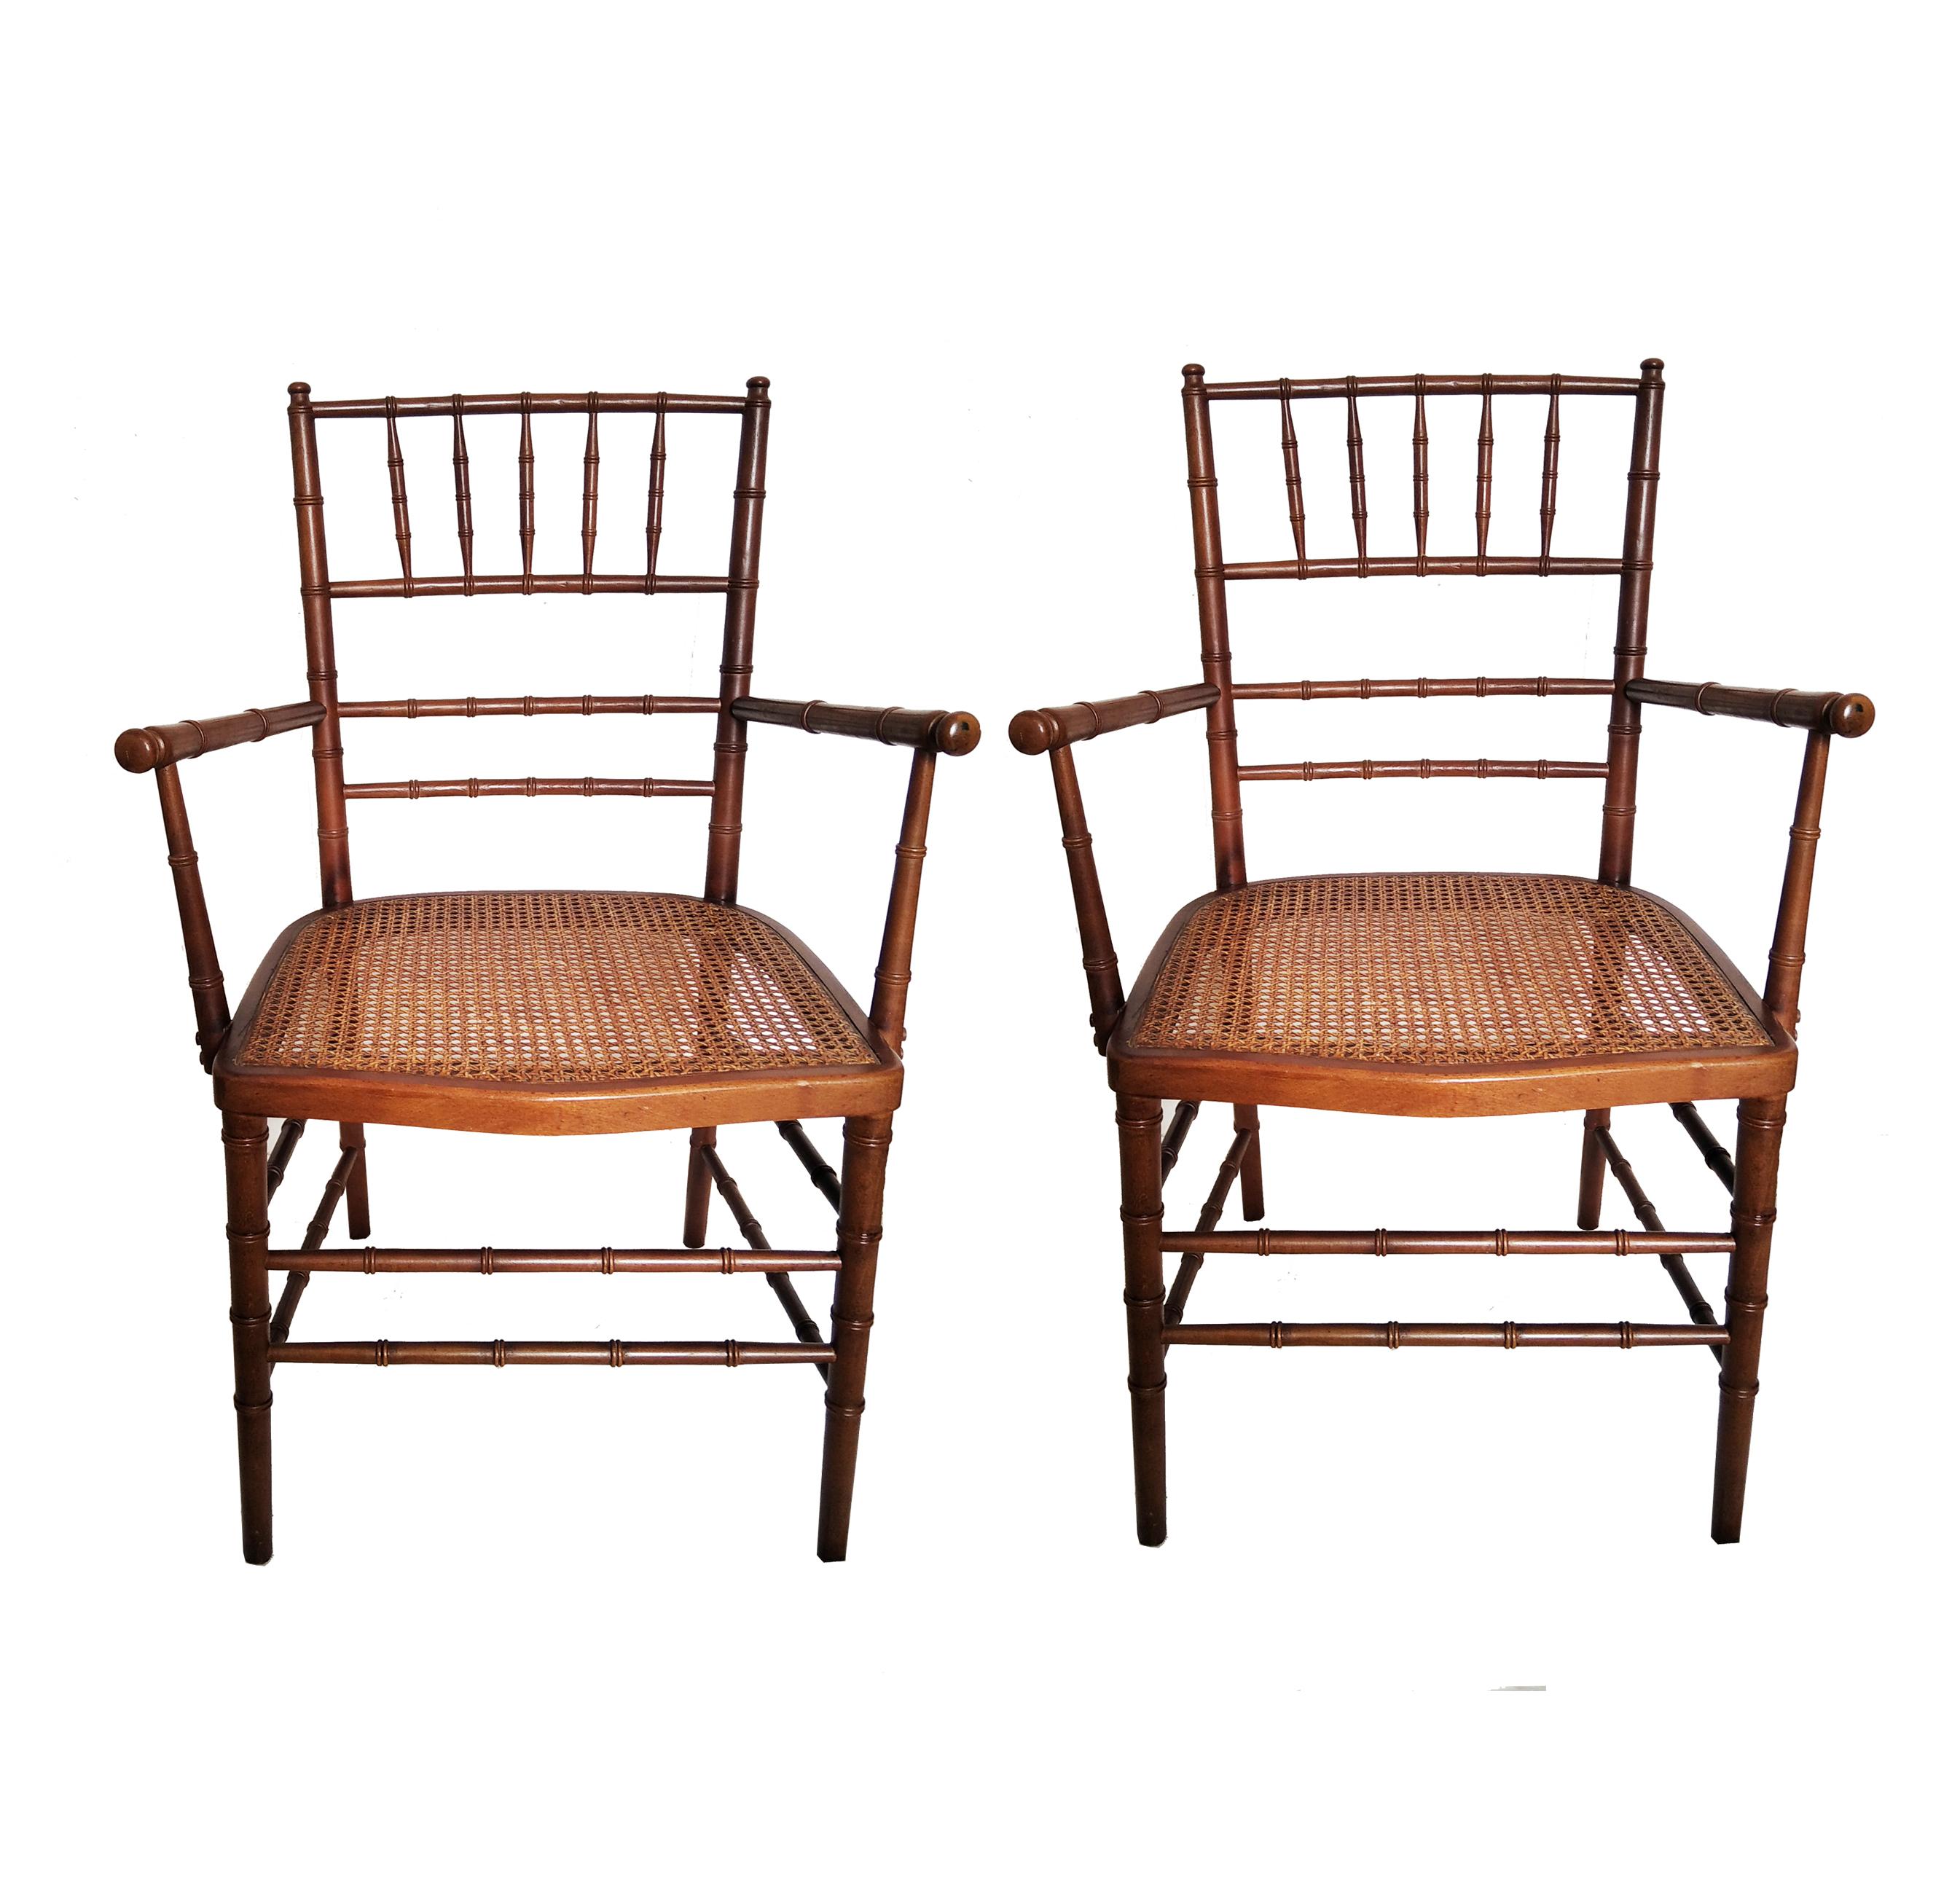 Midcentury Chinese Chippendale Faux bamboo brown archairs whit rattan seat
     *For shipments to Europe, US or UK, request a quote. We will look for 
       the tightest budget at the time
Midcetury wood dining armchair in faux bamboo 
Made in the